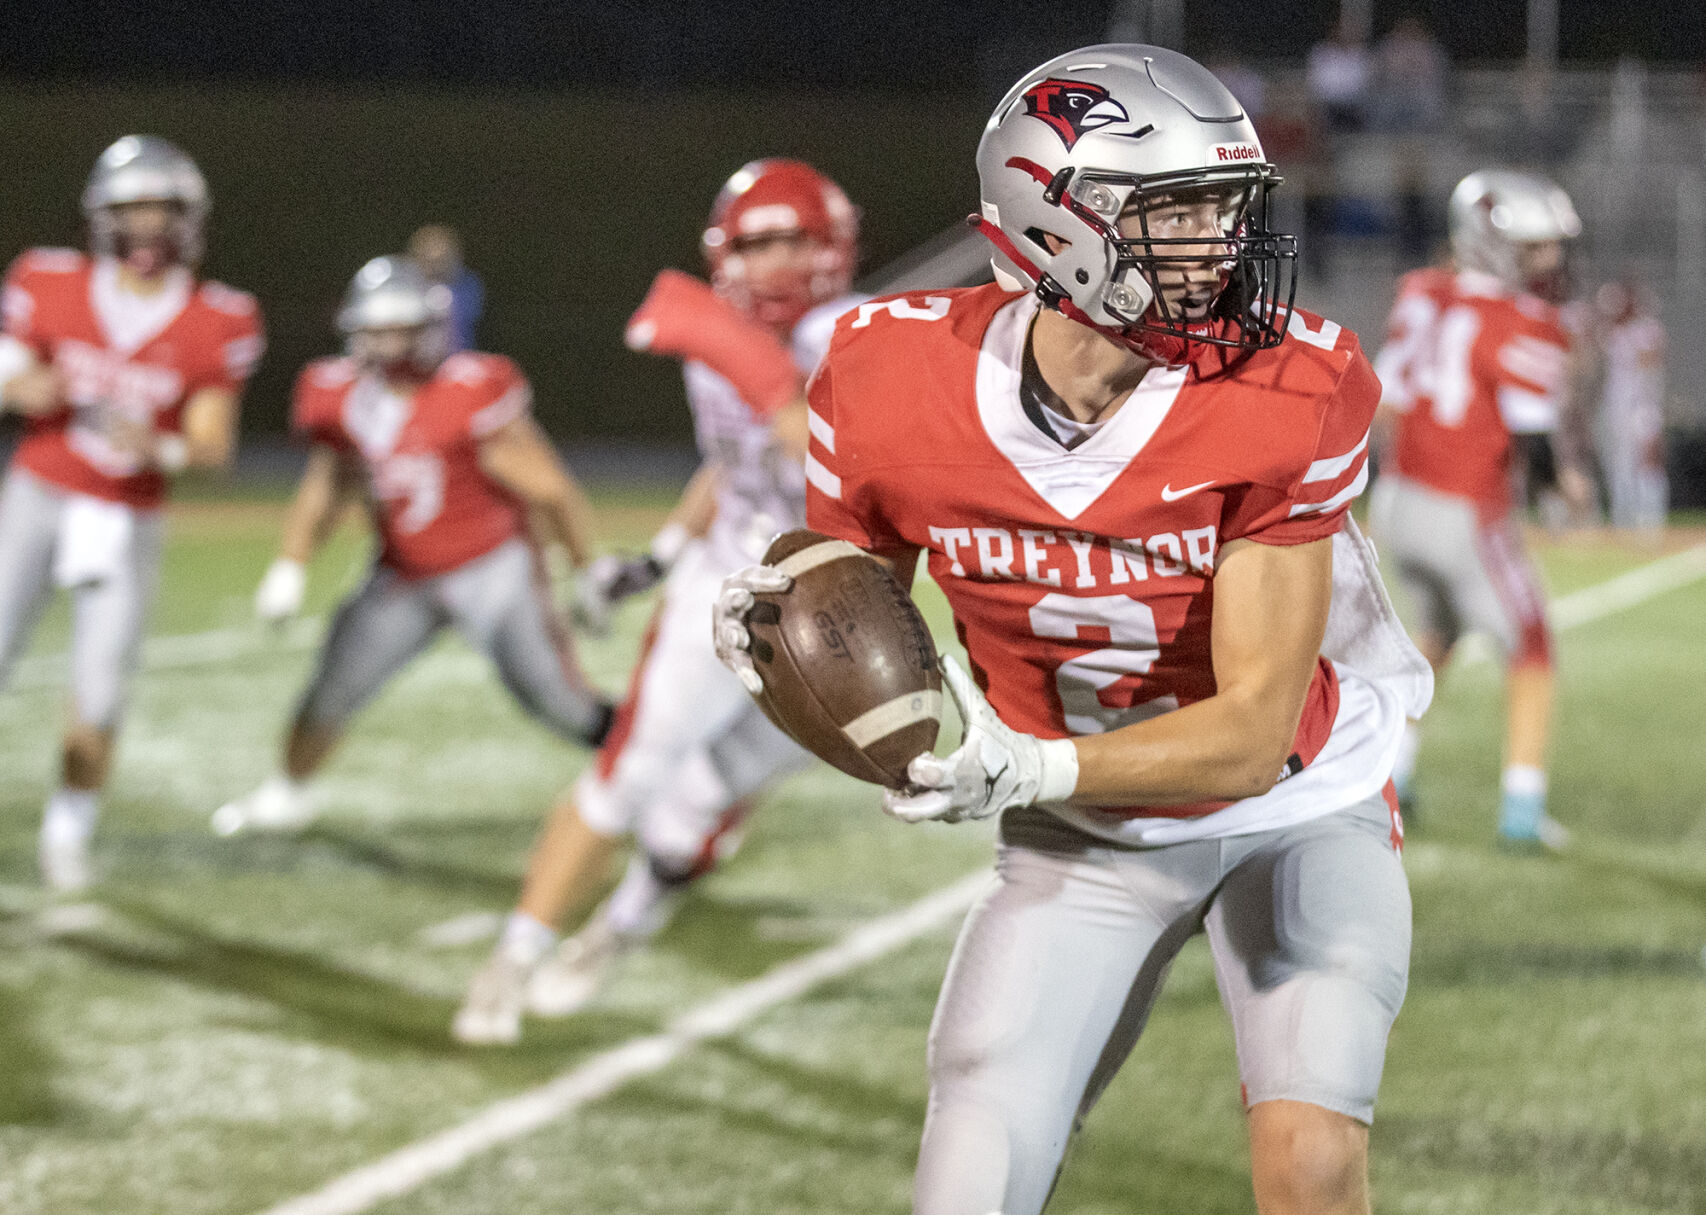 Big Ben to Karson connection leads Treynor to 31-13 win over West Sioux